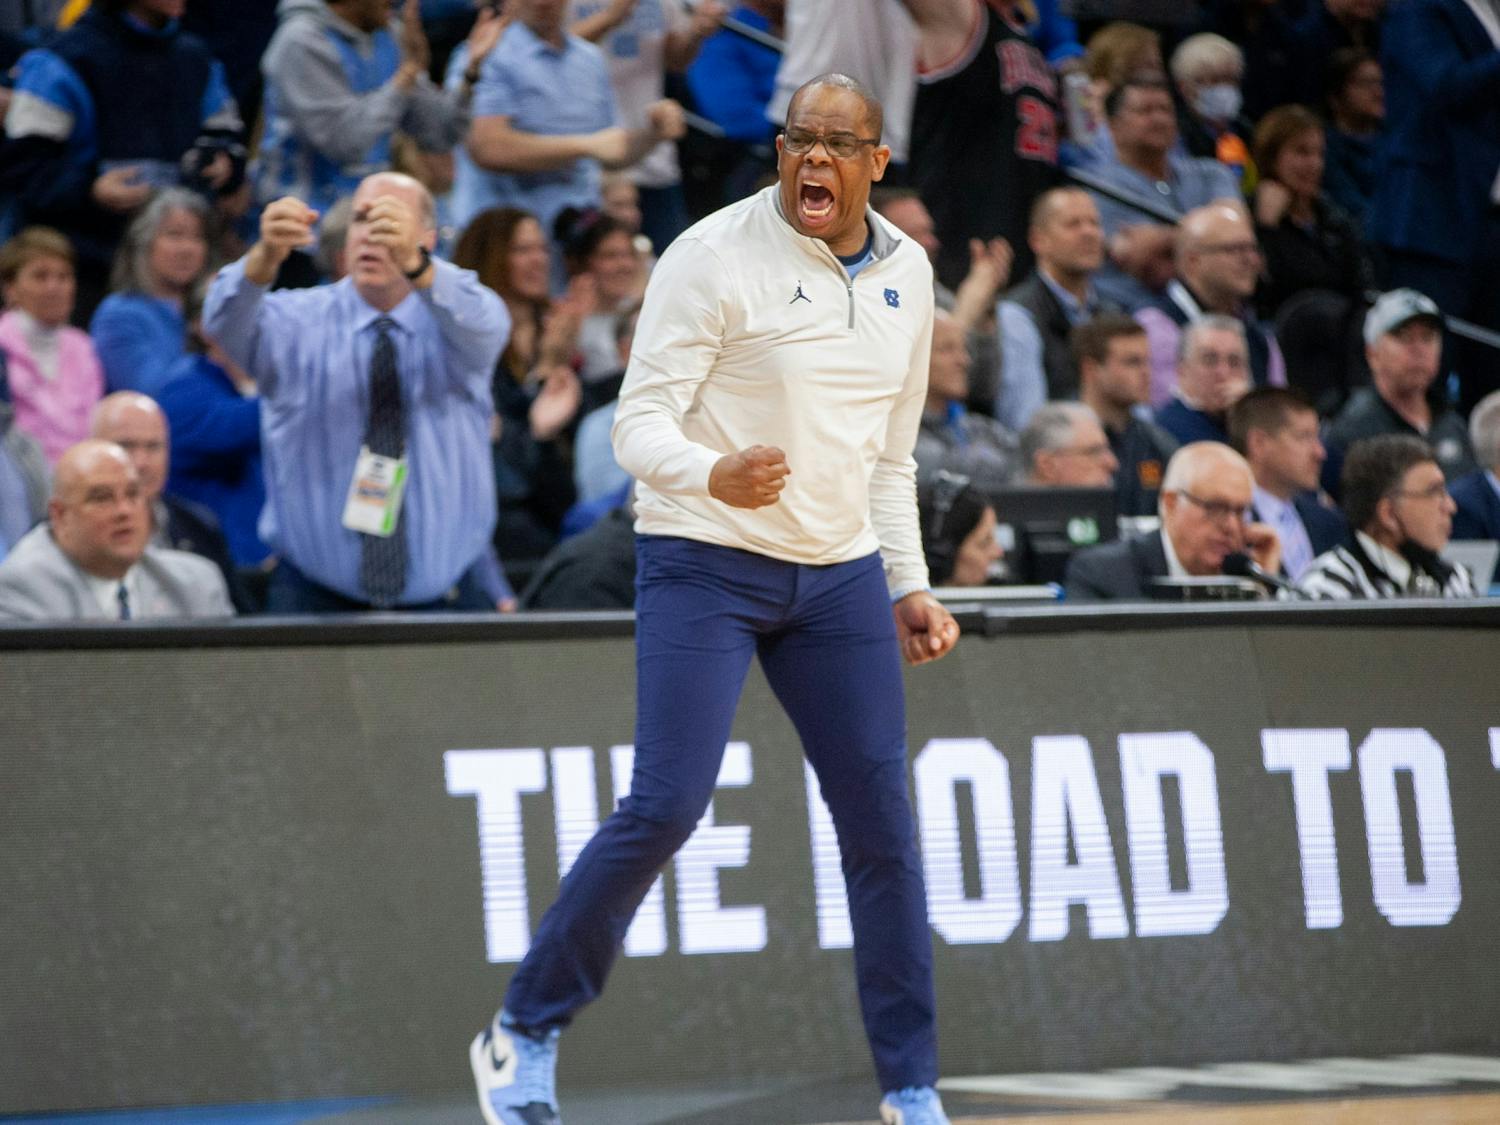 Head coach Hubert Davis yells to his players at the NCAA Sweet 16 game against UCLA at the Wells Fargo Center in Philadelphia, PA on March 25, 2022. UNC won 73-66 and will be advancing to the Elite 8.